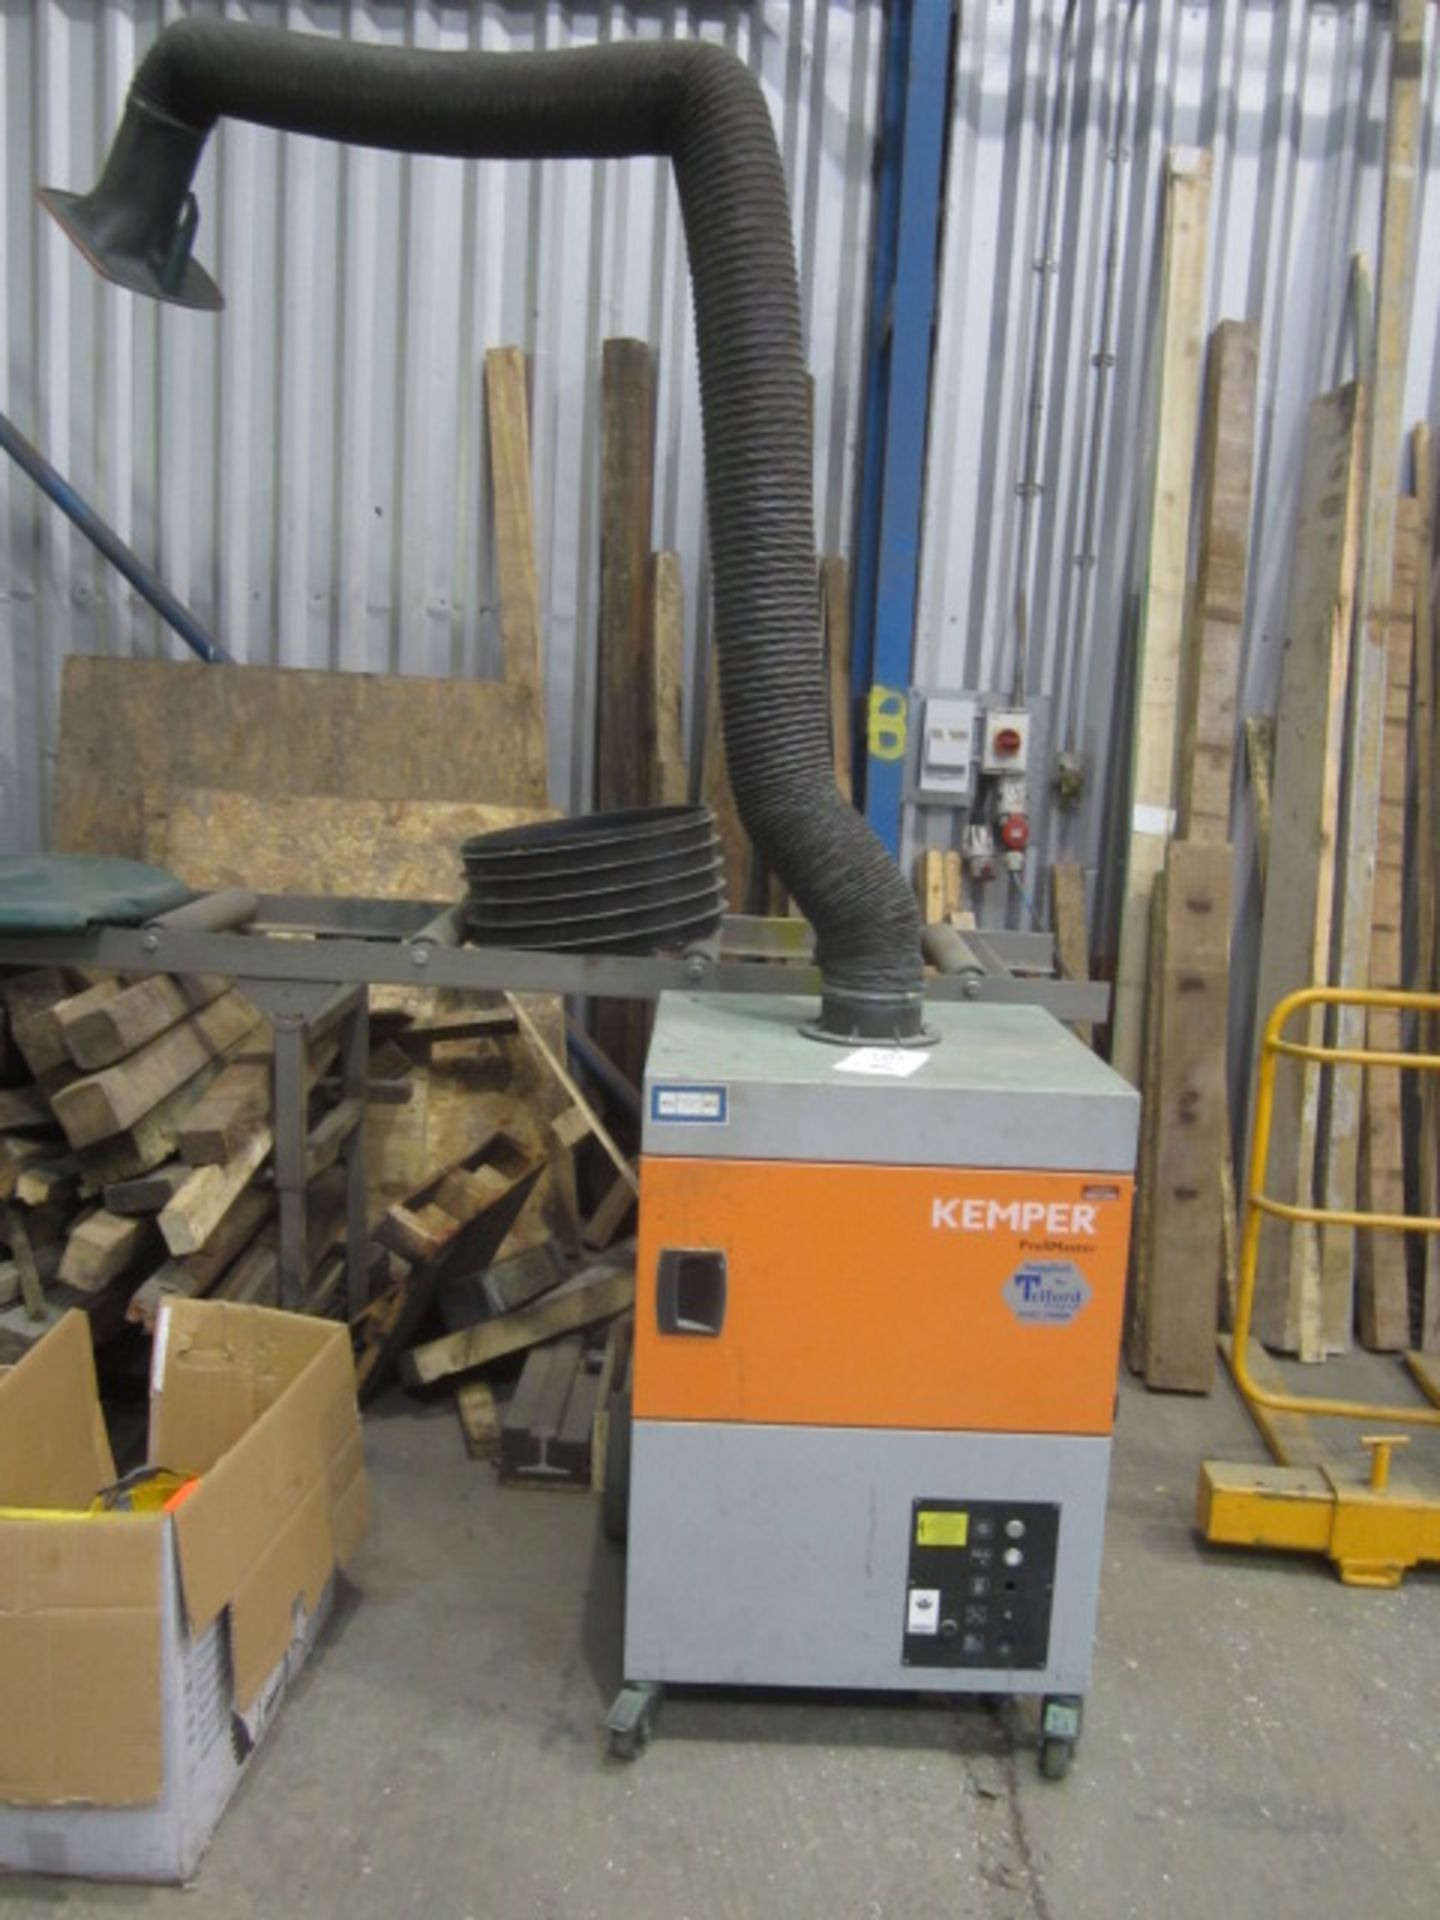 Kemper Profimaster mobile dust extraction